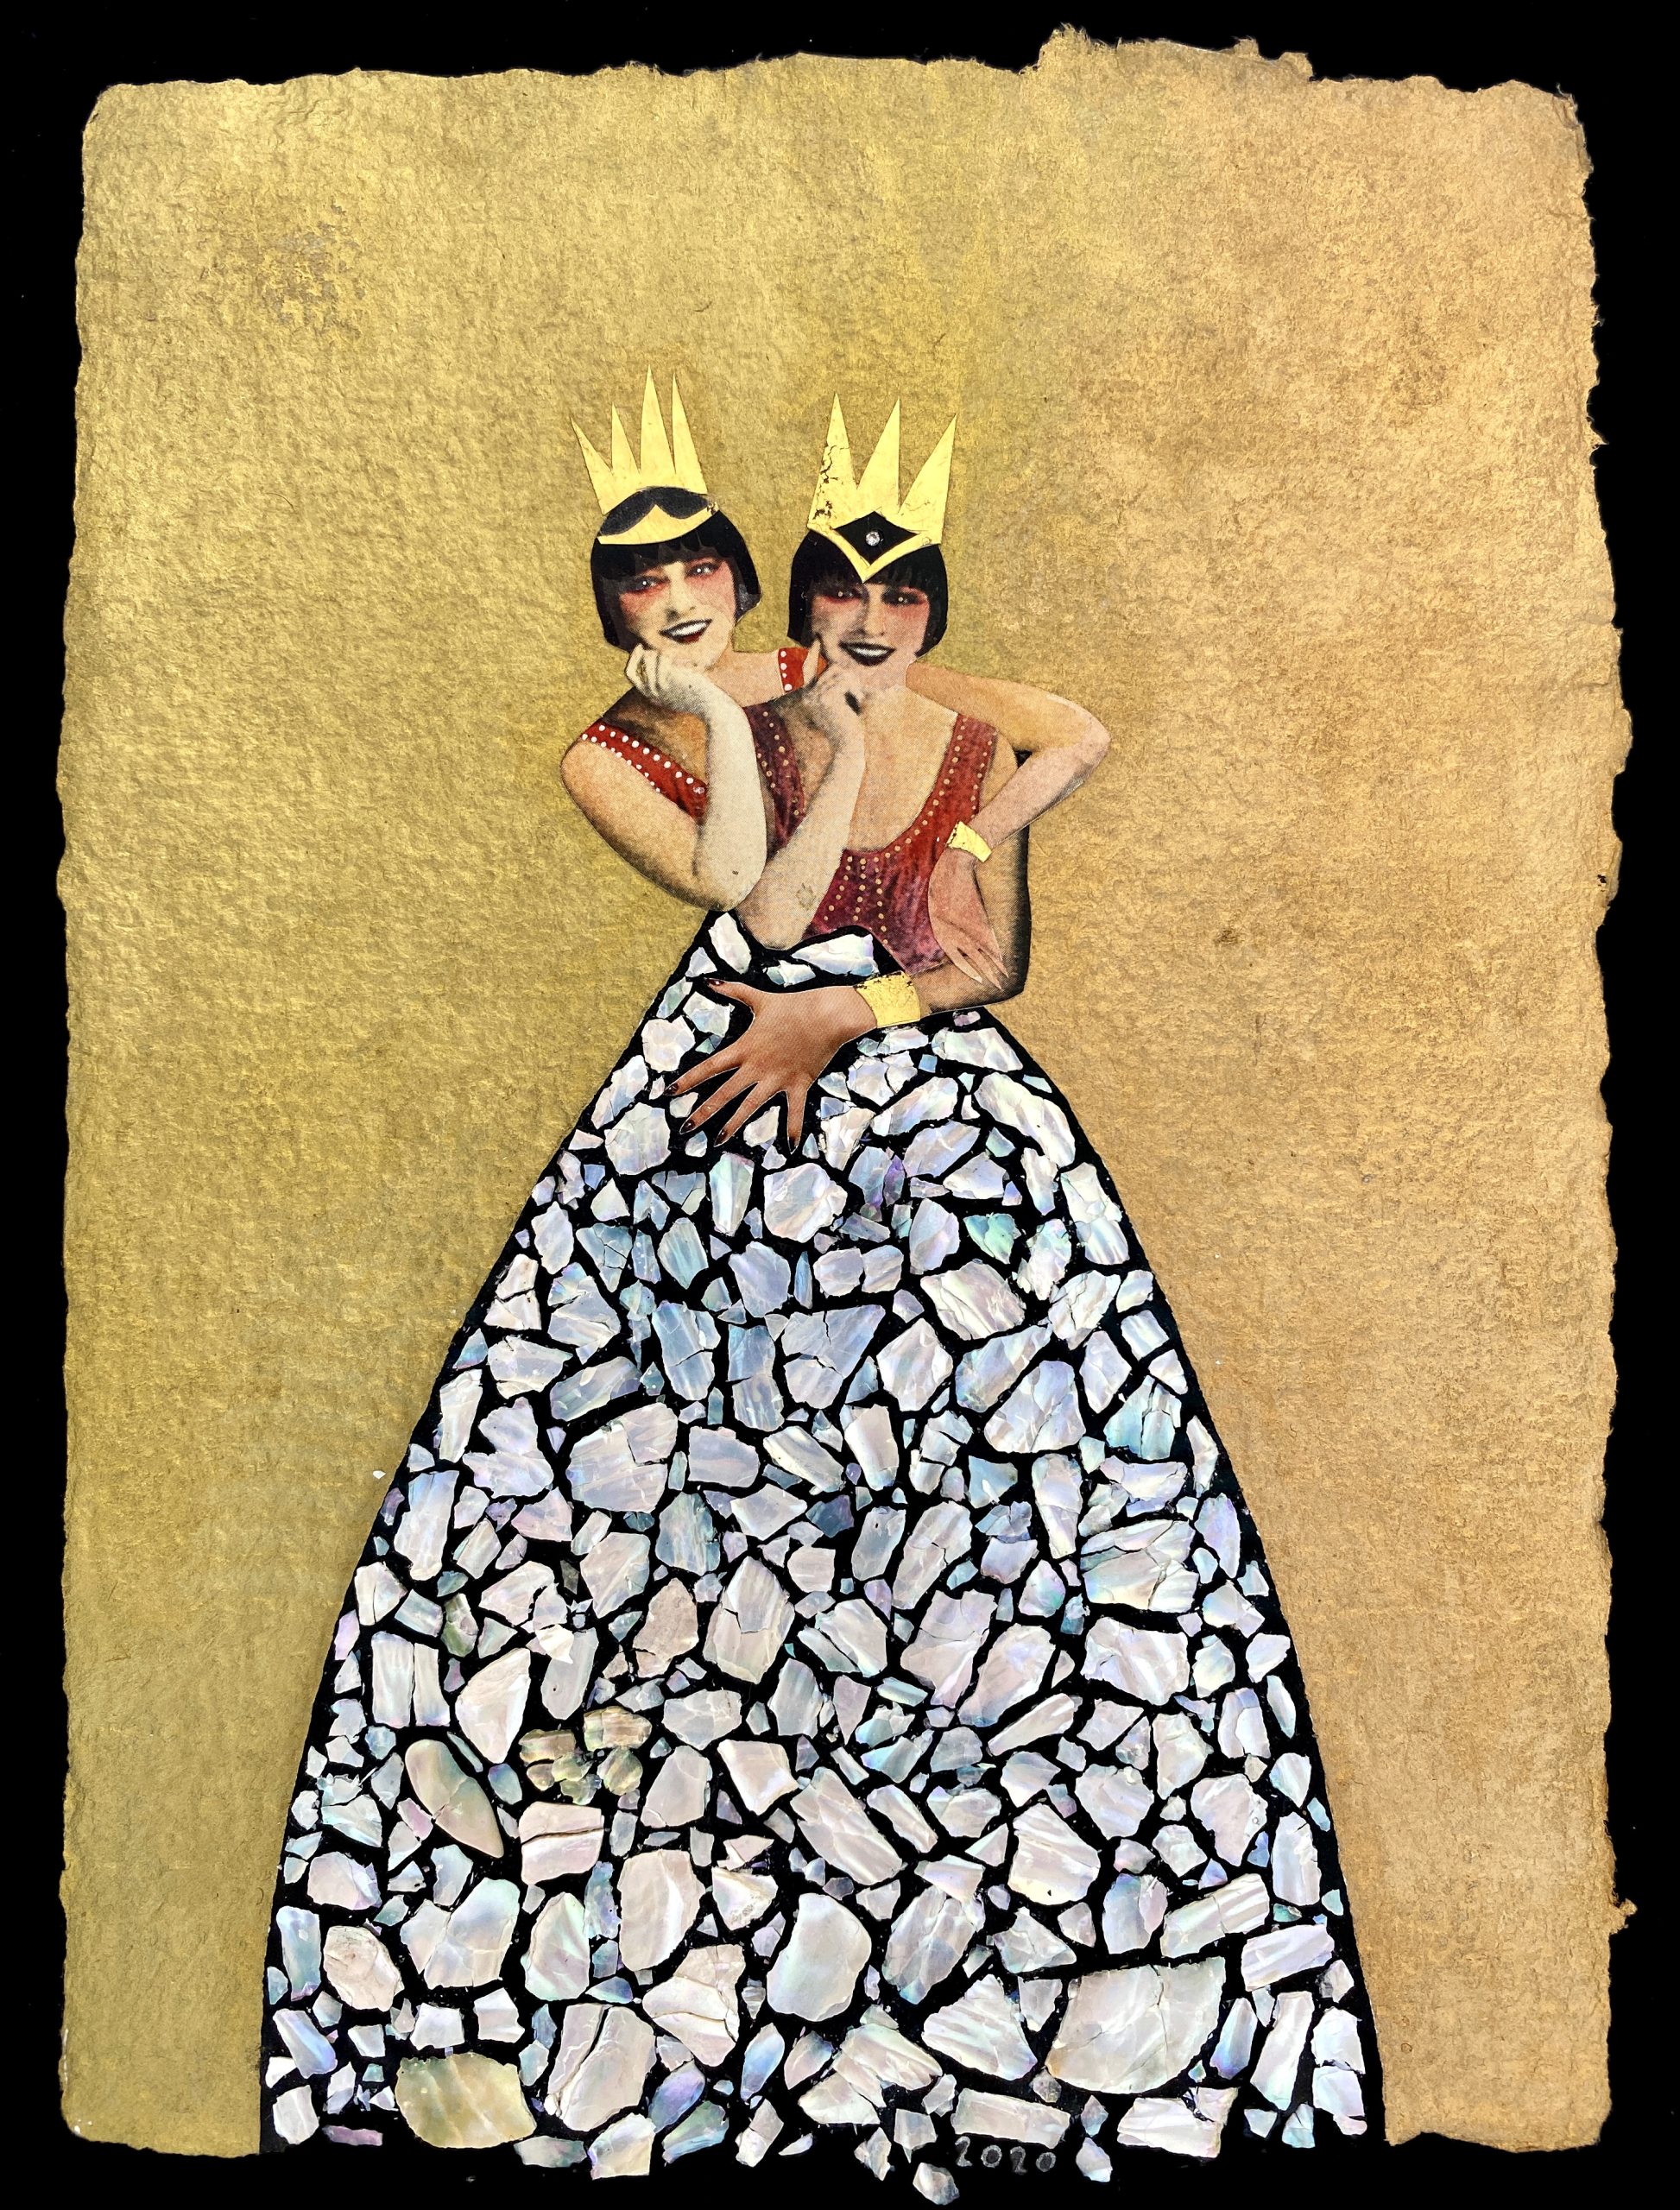 Kelly_Pearly queens_Collage, watercolours, mother of pearl, 24ct gold leaf and natural diamond on St Armand handmade cotton paper_24 x 18cm_